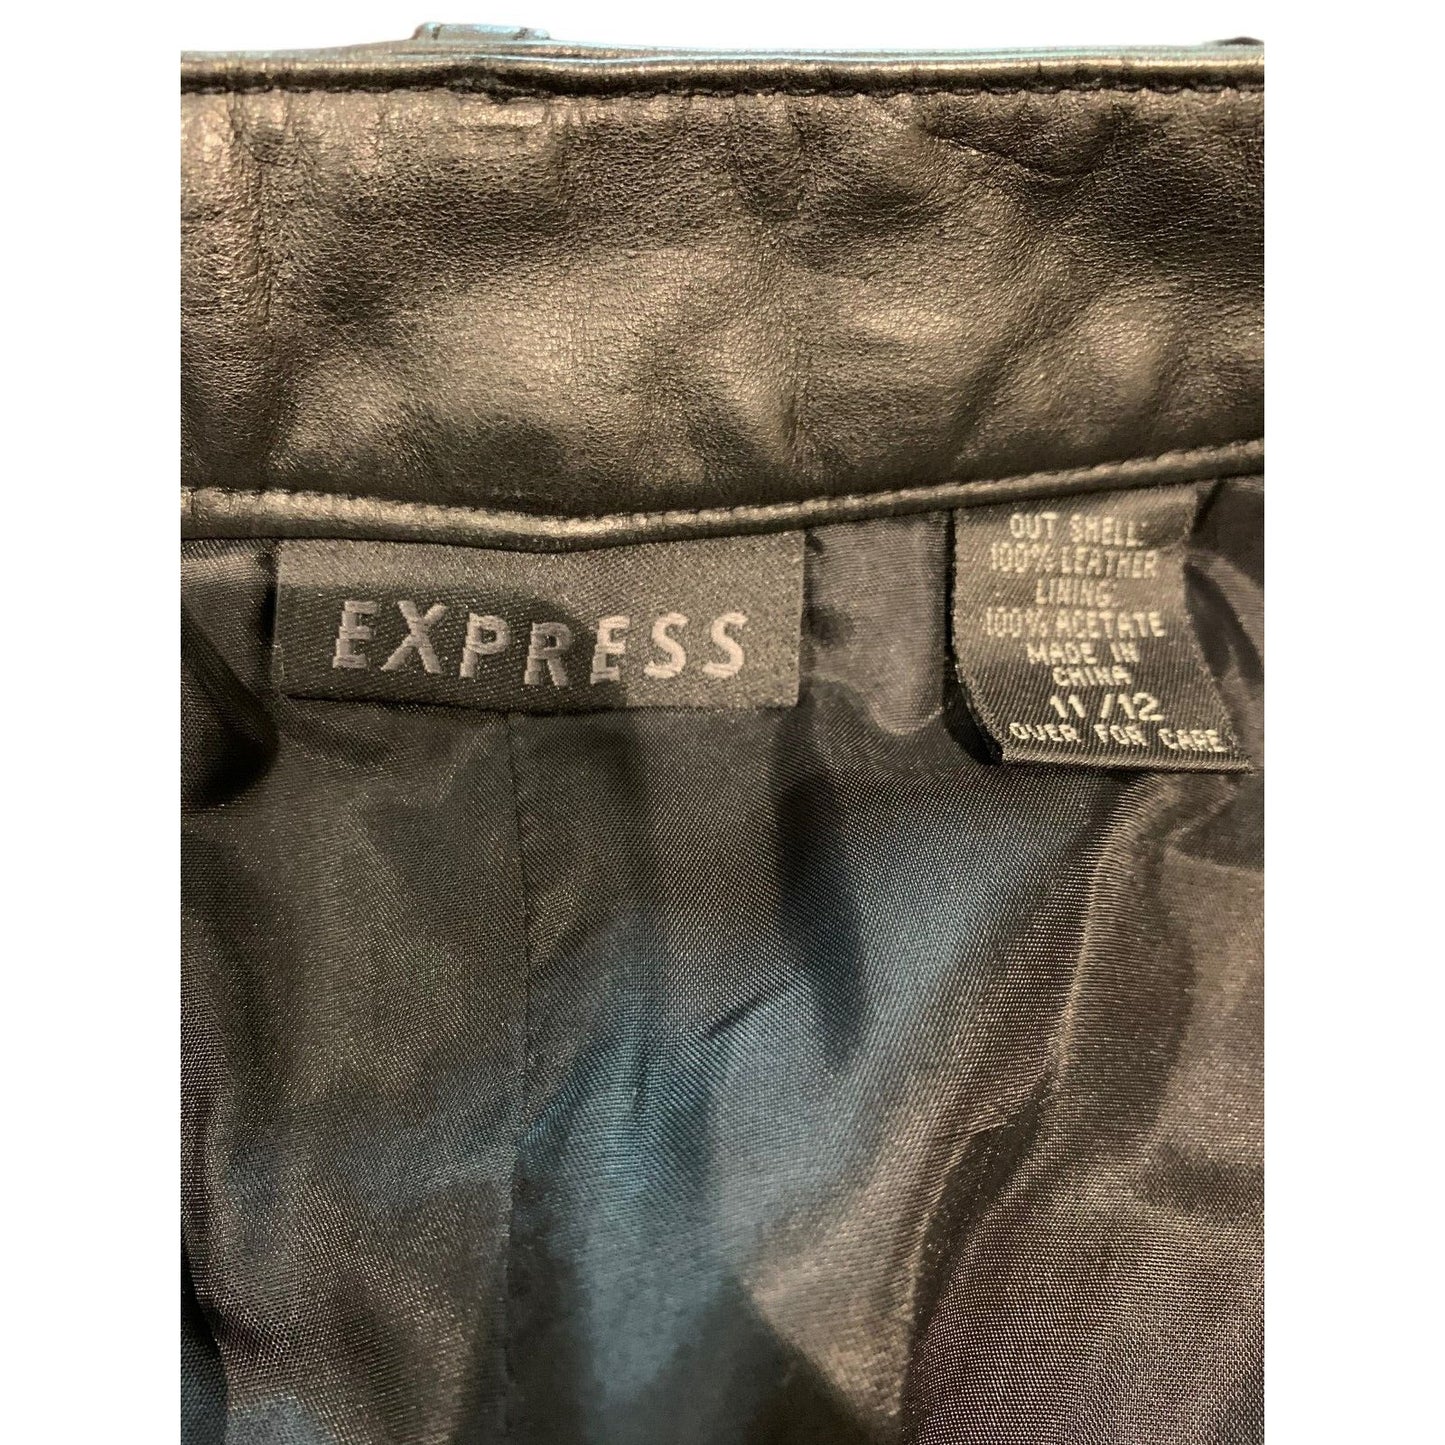 Brand Label And Fabric Info